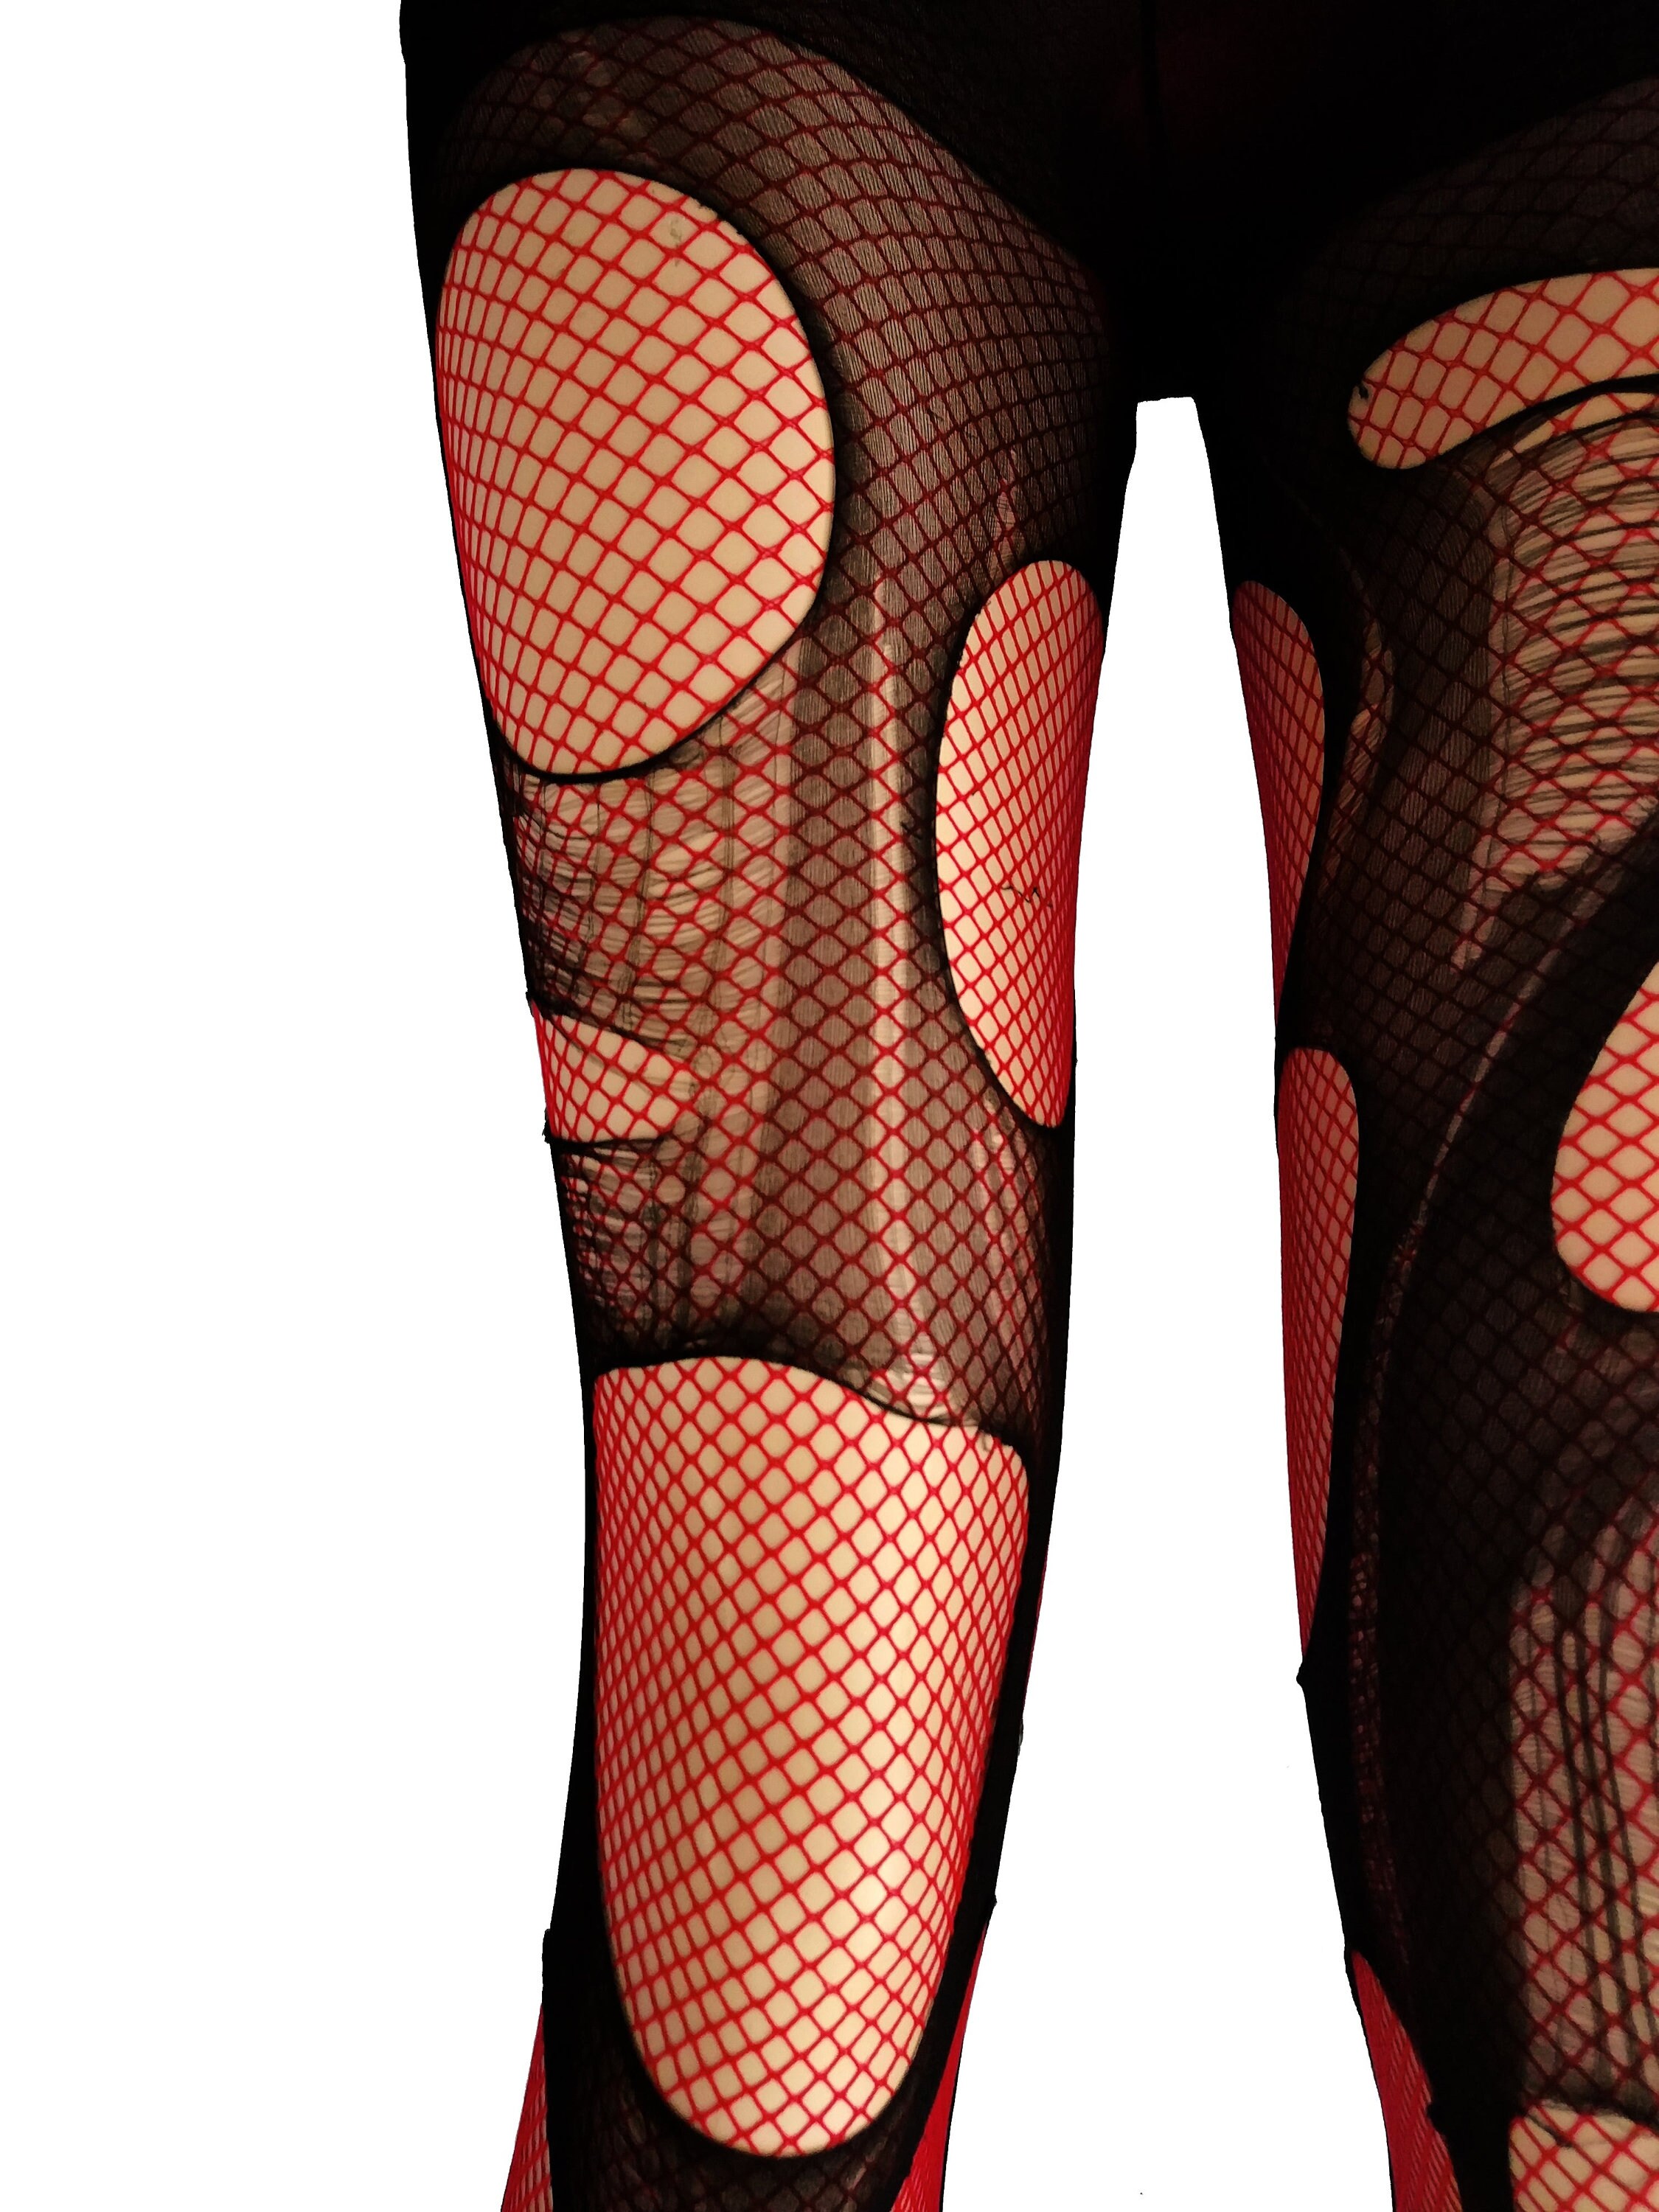 Red Black Fishnet Tights Fishnet Stockings Double Layered Tattered